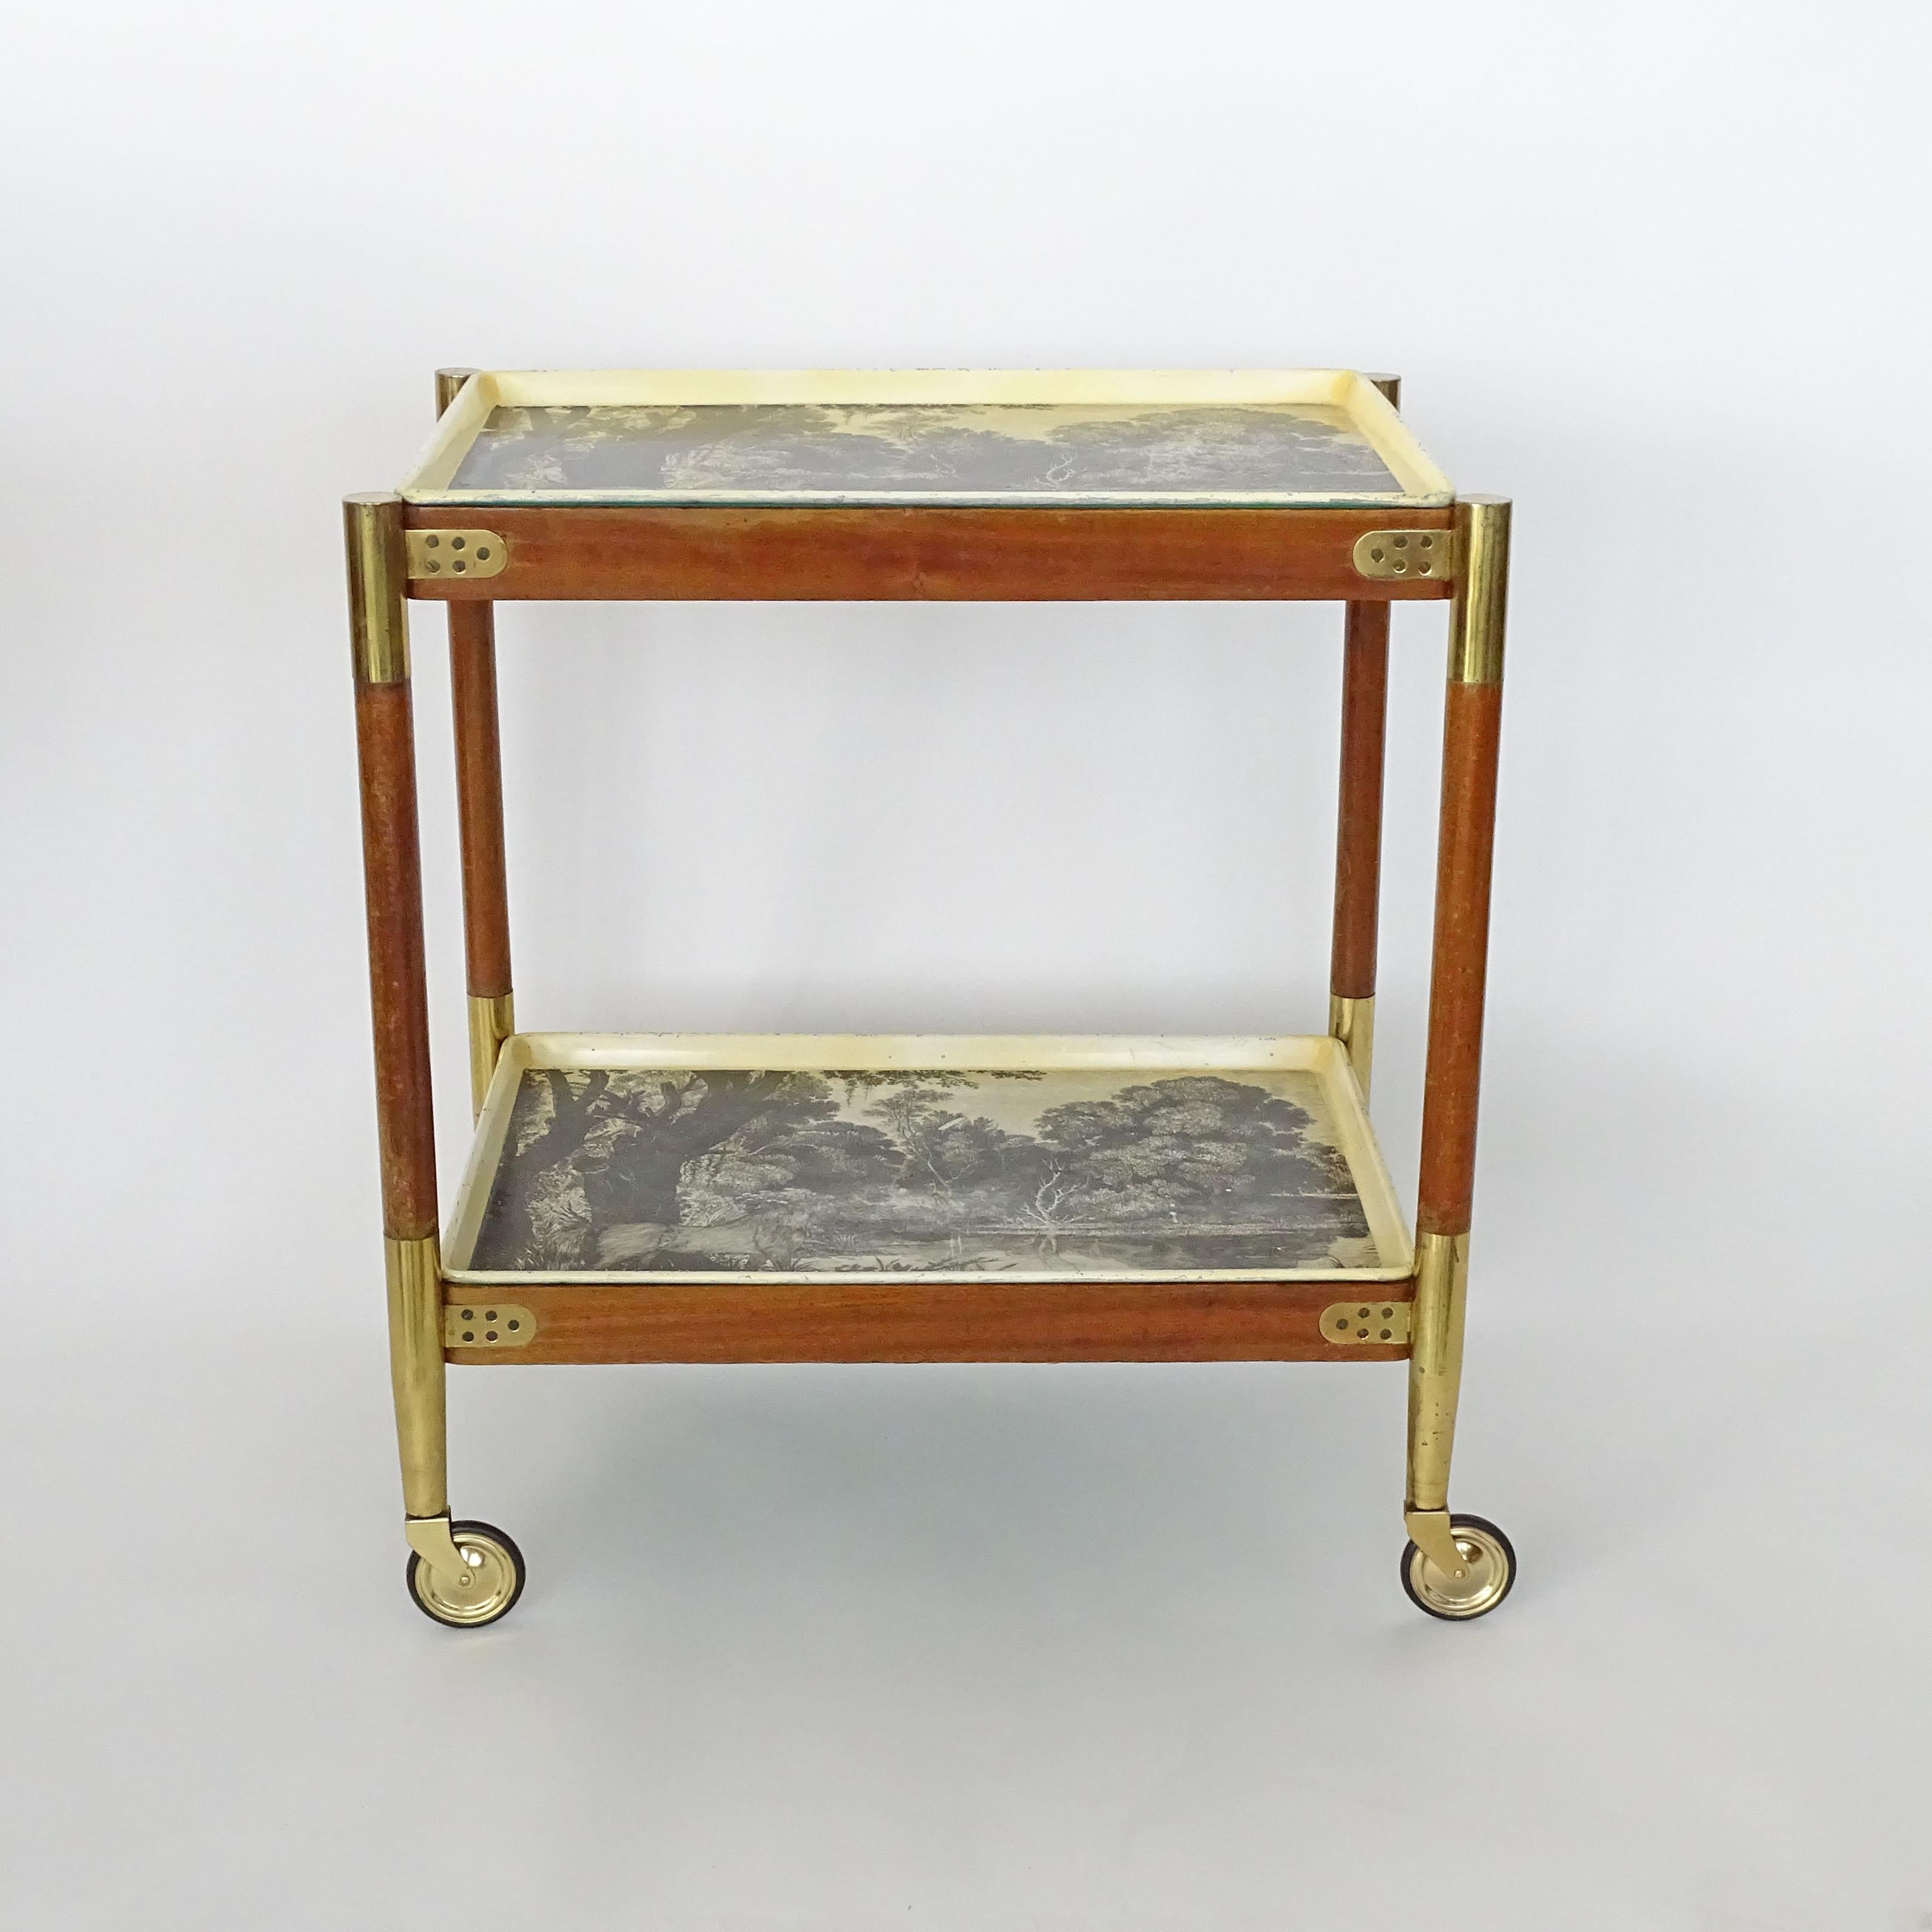 Mid-Century Modern Piero Fornasetti Wood and Brass Folding Trolley, Italy, 1950s For Sale